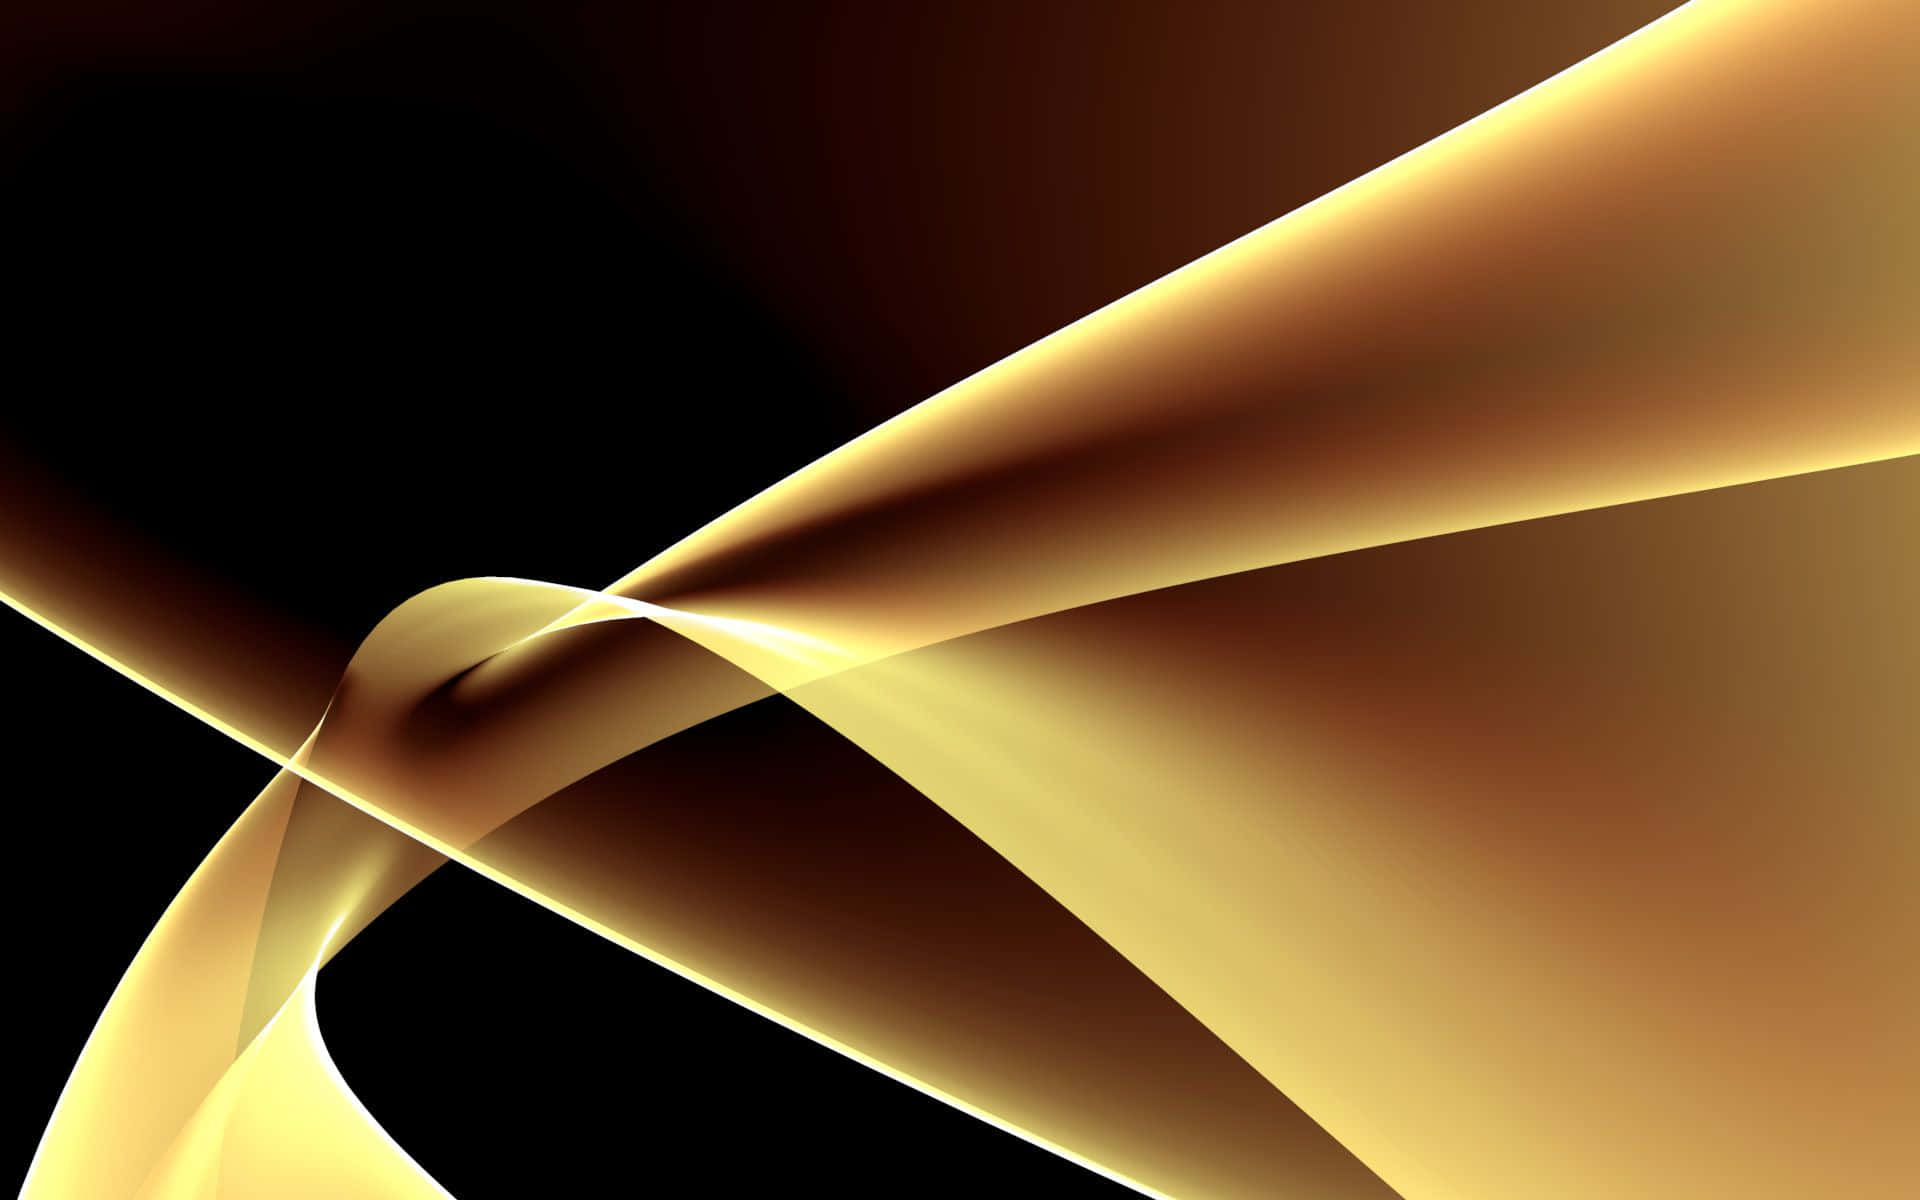 Curving Shapes Gold And Black Background